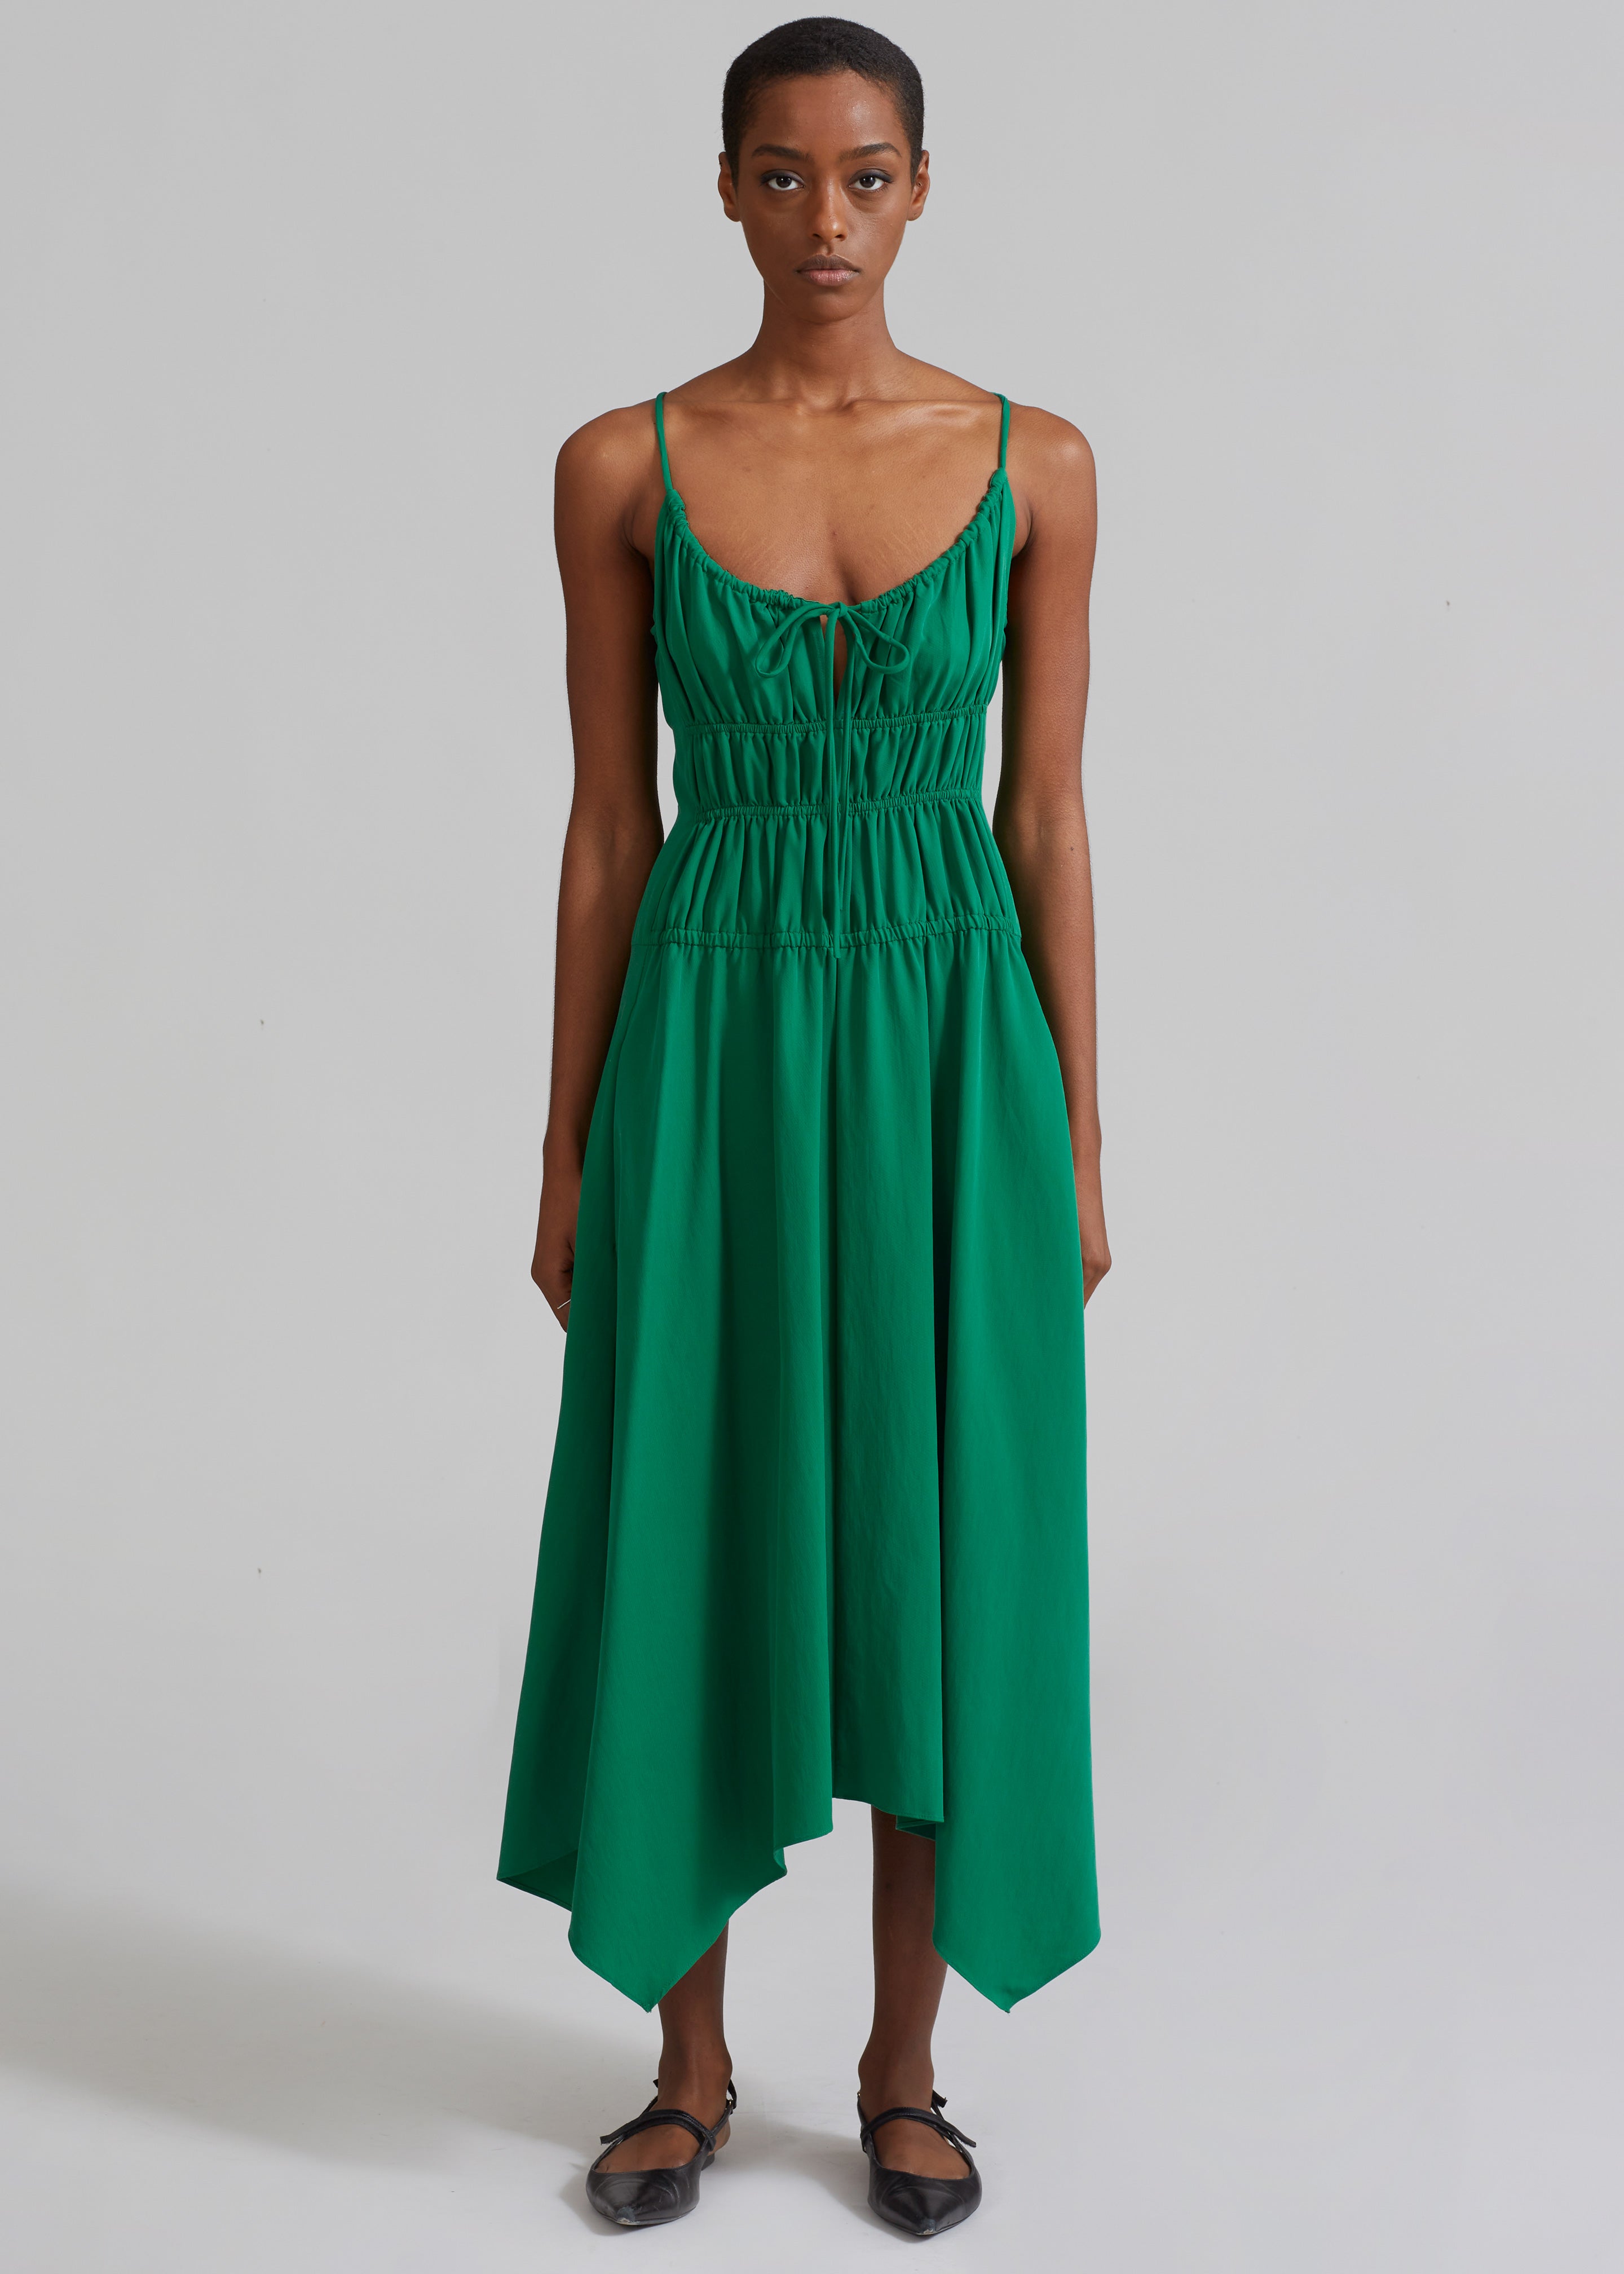 Proenza Schouler White Label Drapey Suiting Ruched Dress - Green - 8